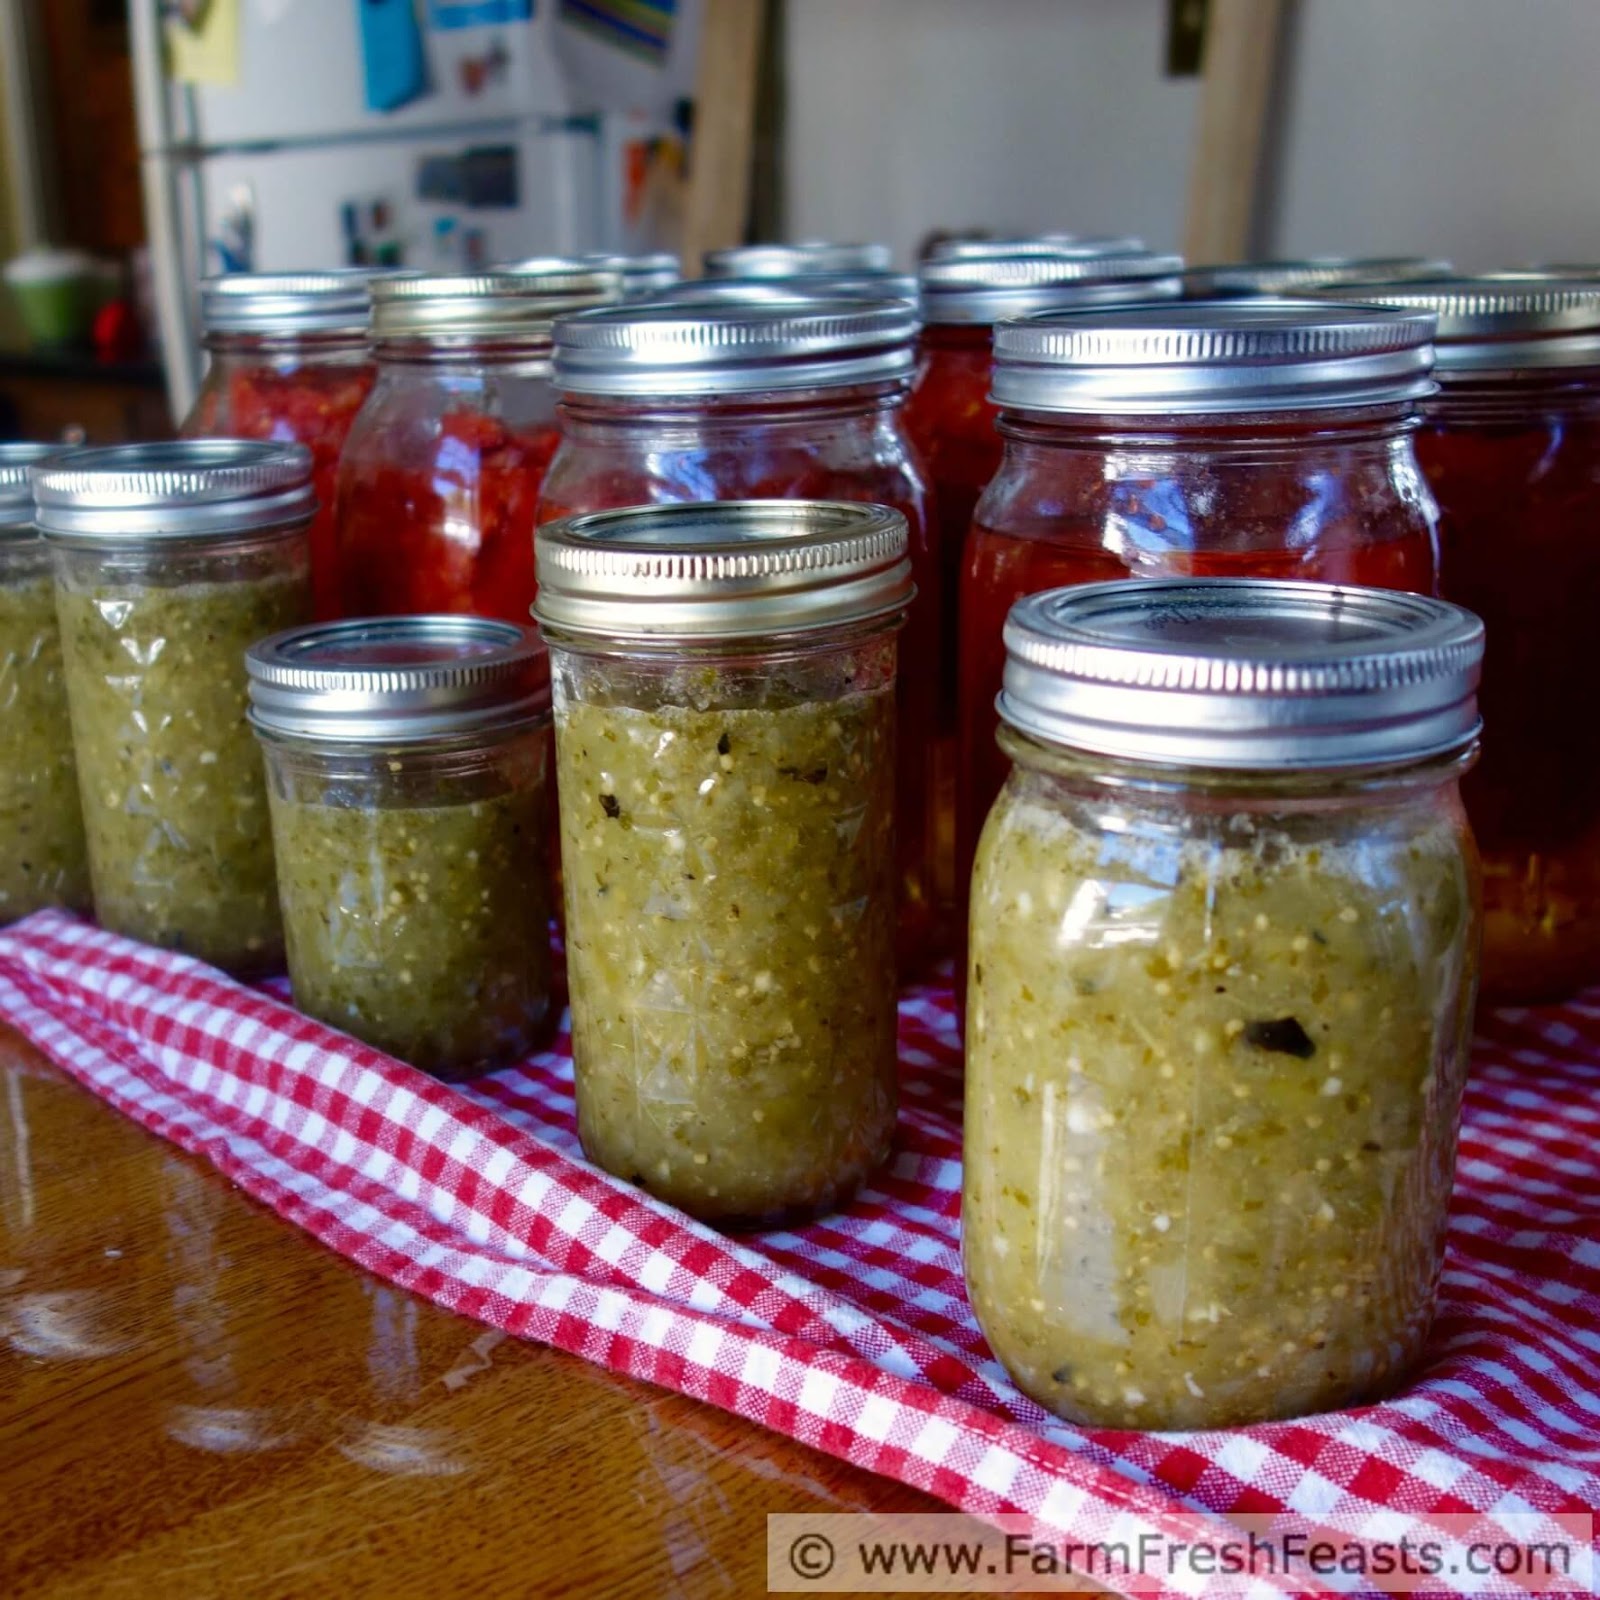 Roasted Hatch Chiles Canning Recipe